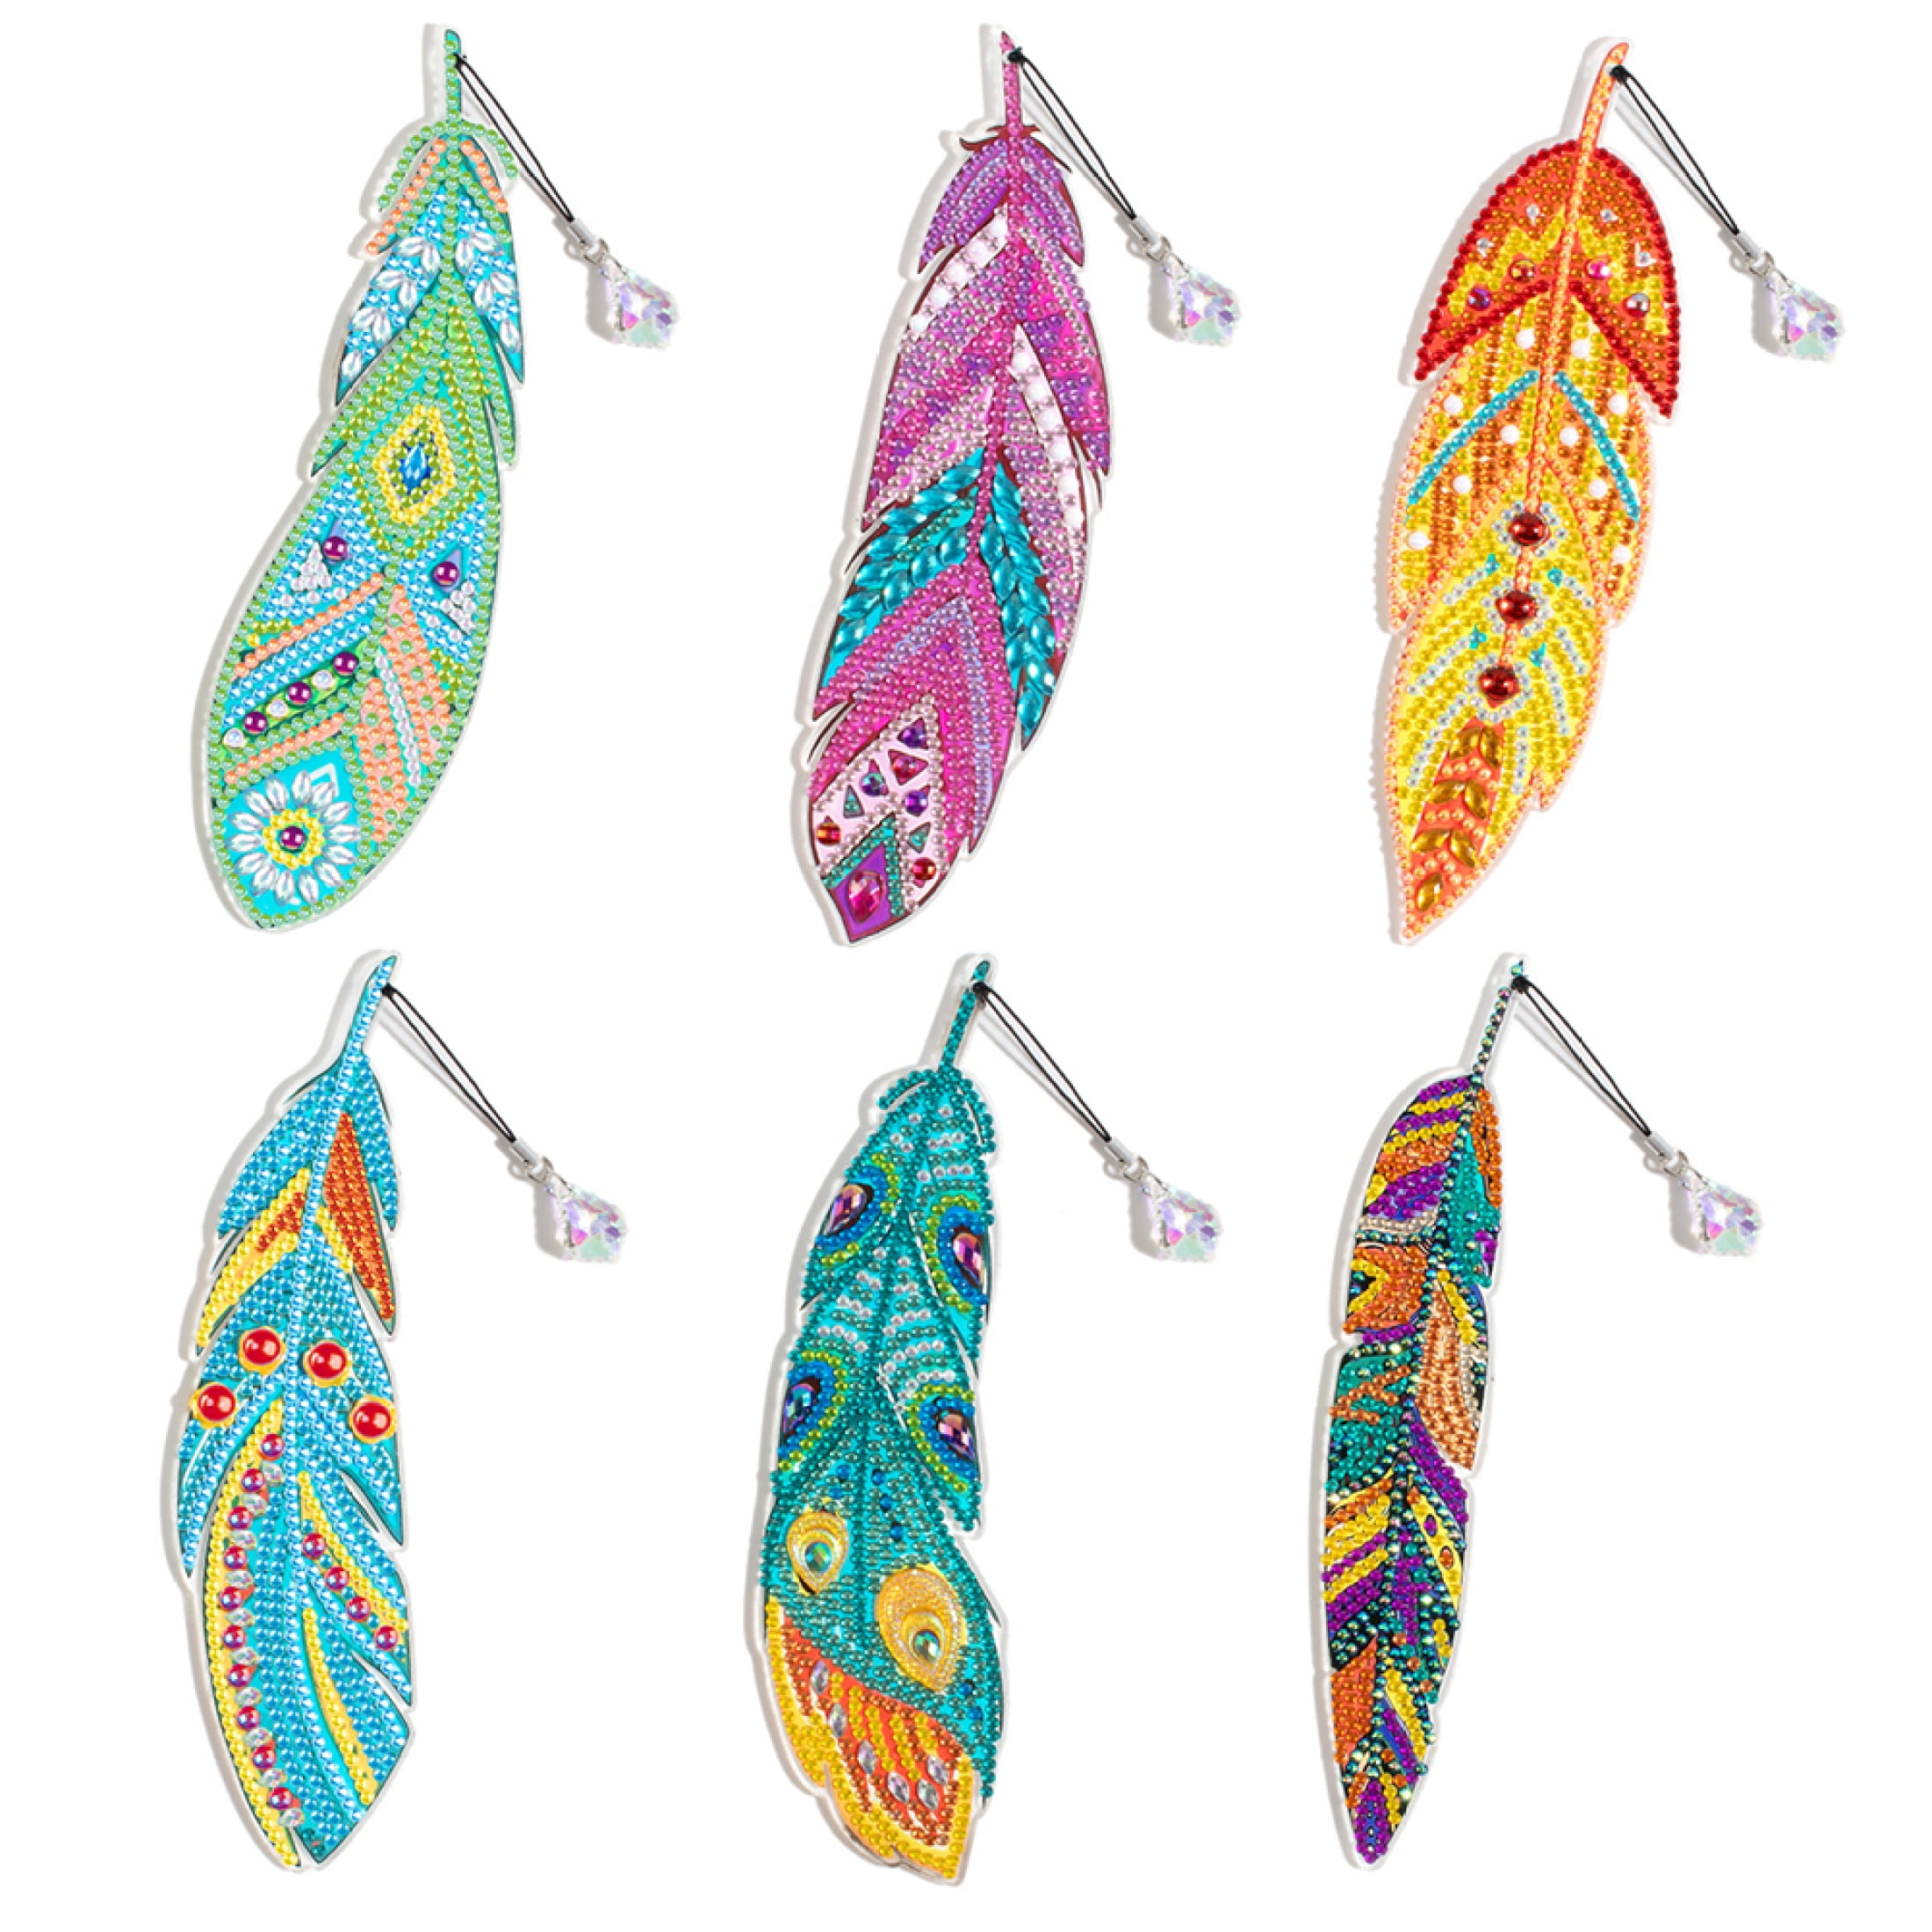 6pcs Diamond Painting Bookmark Kits Feather Shape Thickened Embroidery  Mosaic Book Mark Art Craft For Beginner